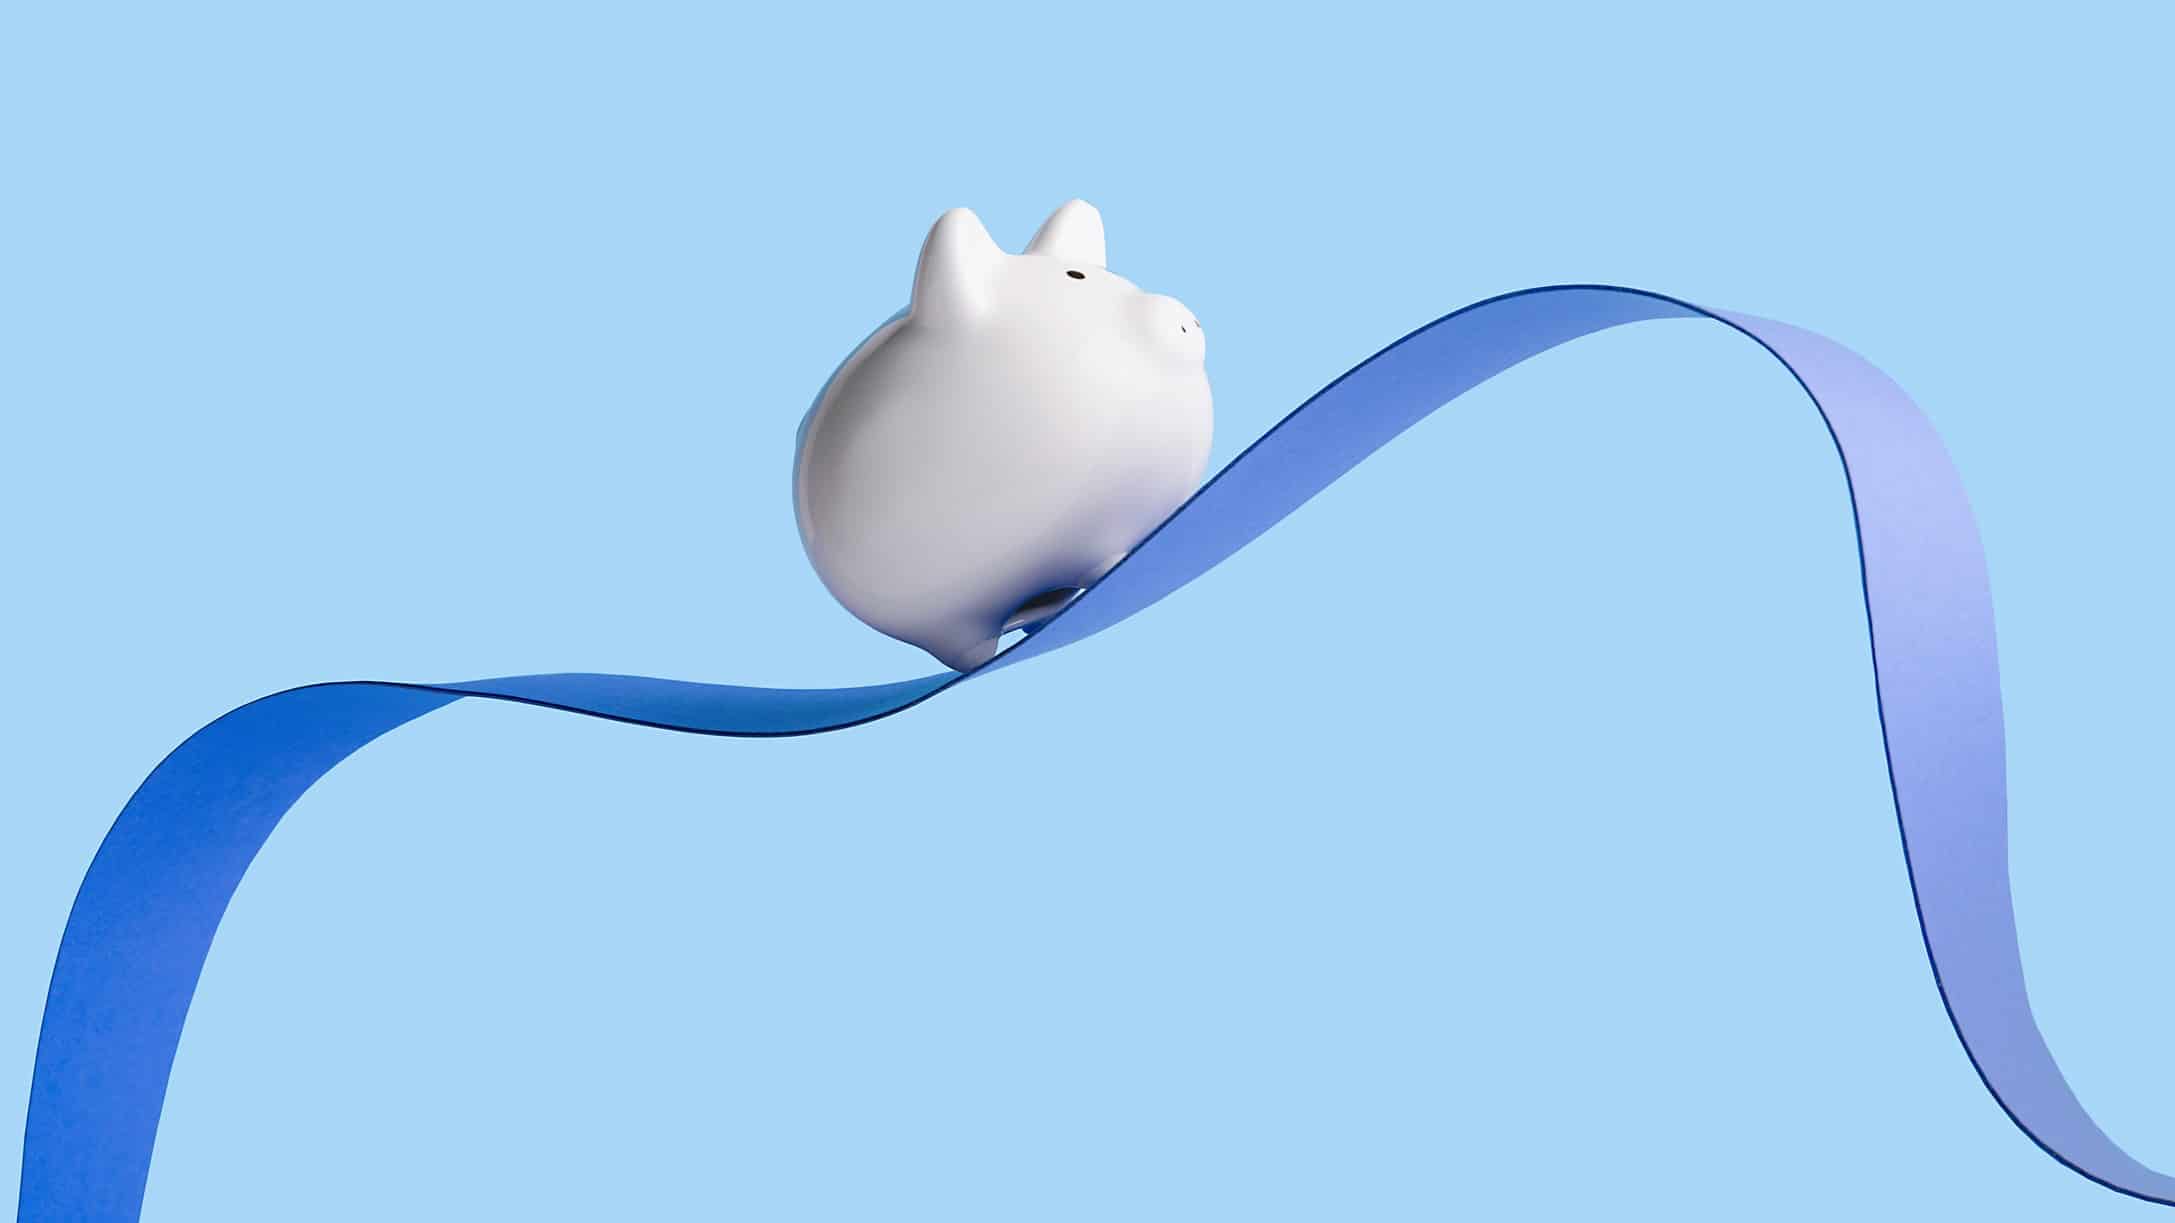 A piggy bank balances on a ribbon, indicating a wobbly share price